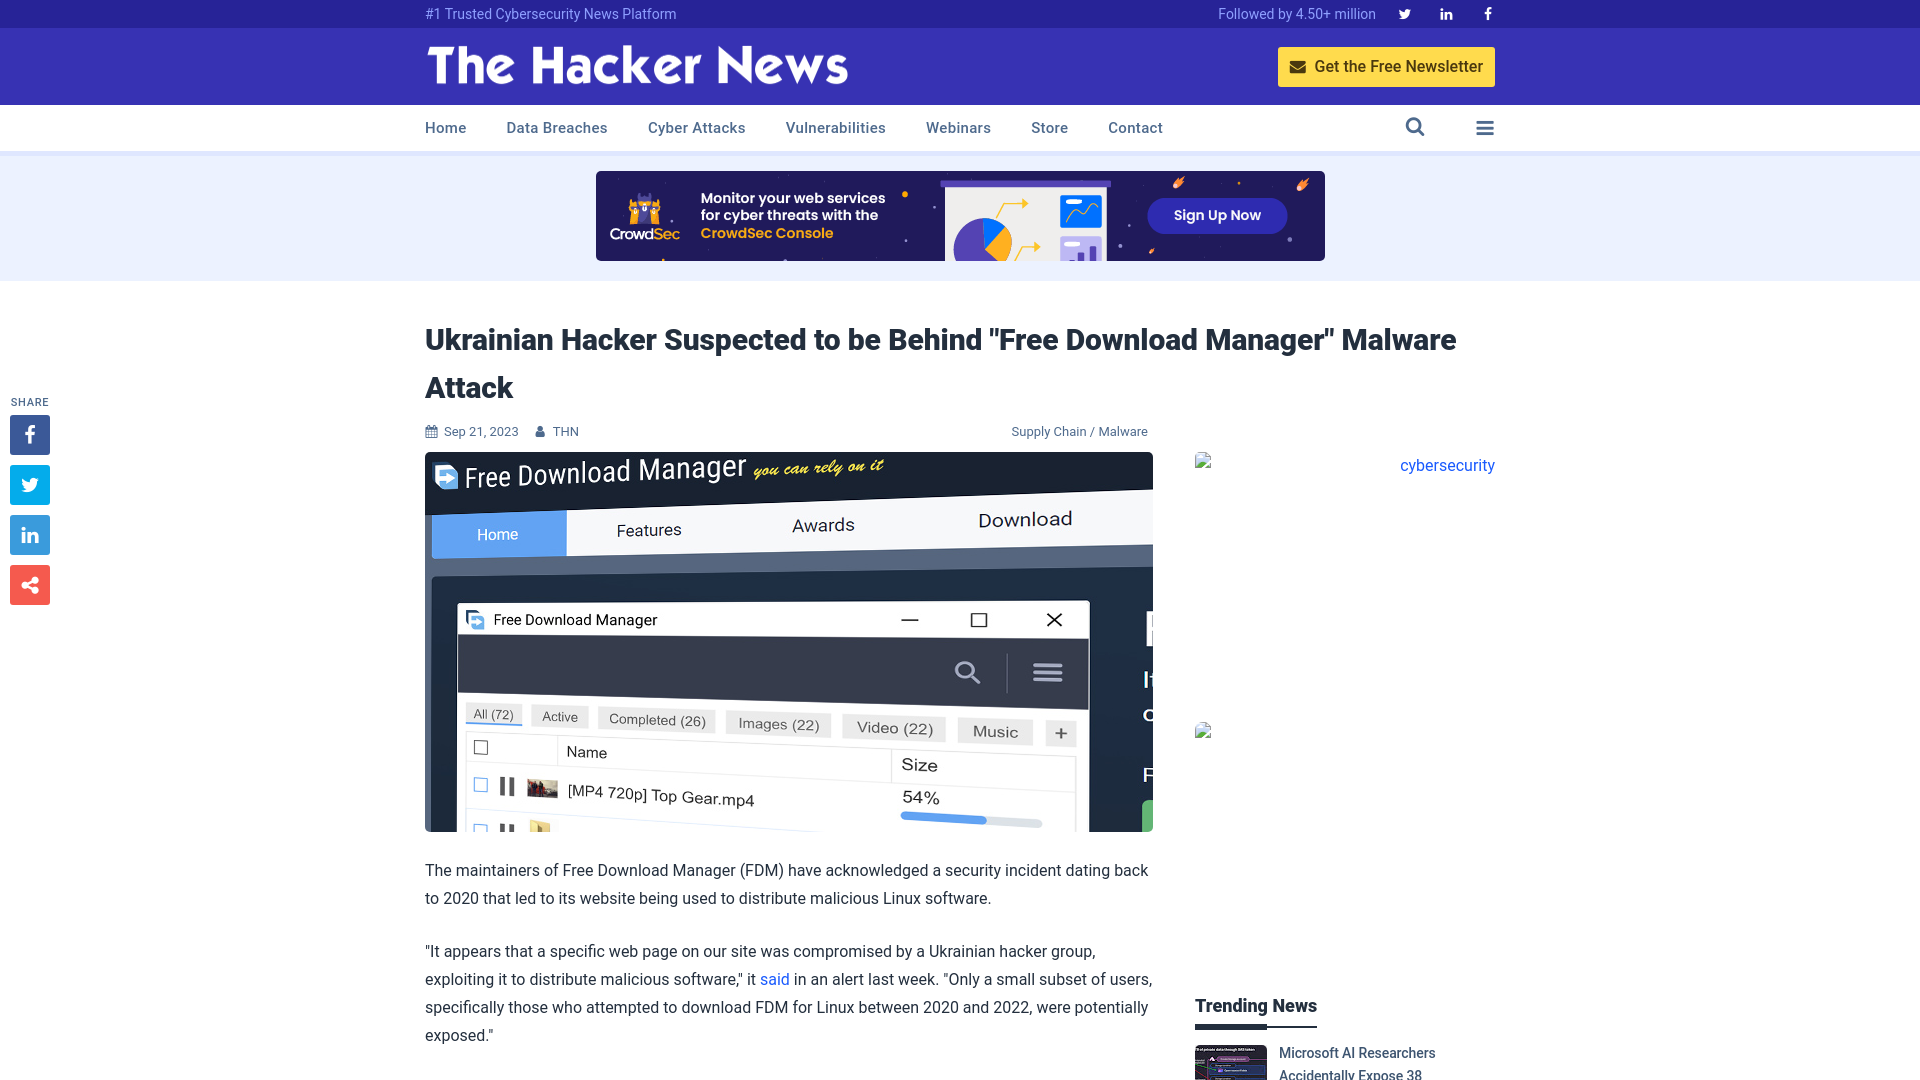 Ukrainian Hacker Suspected to be Behind "Free Download Manager" Malware Attack